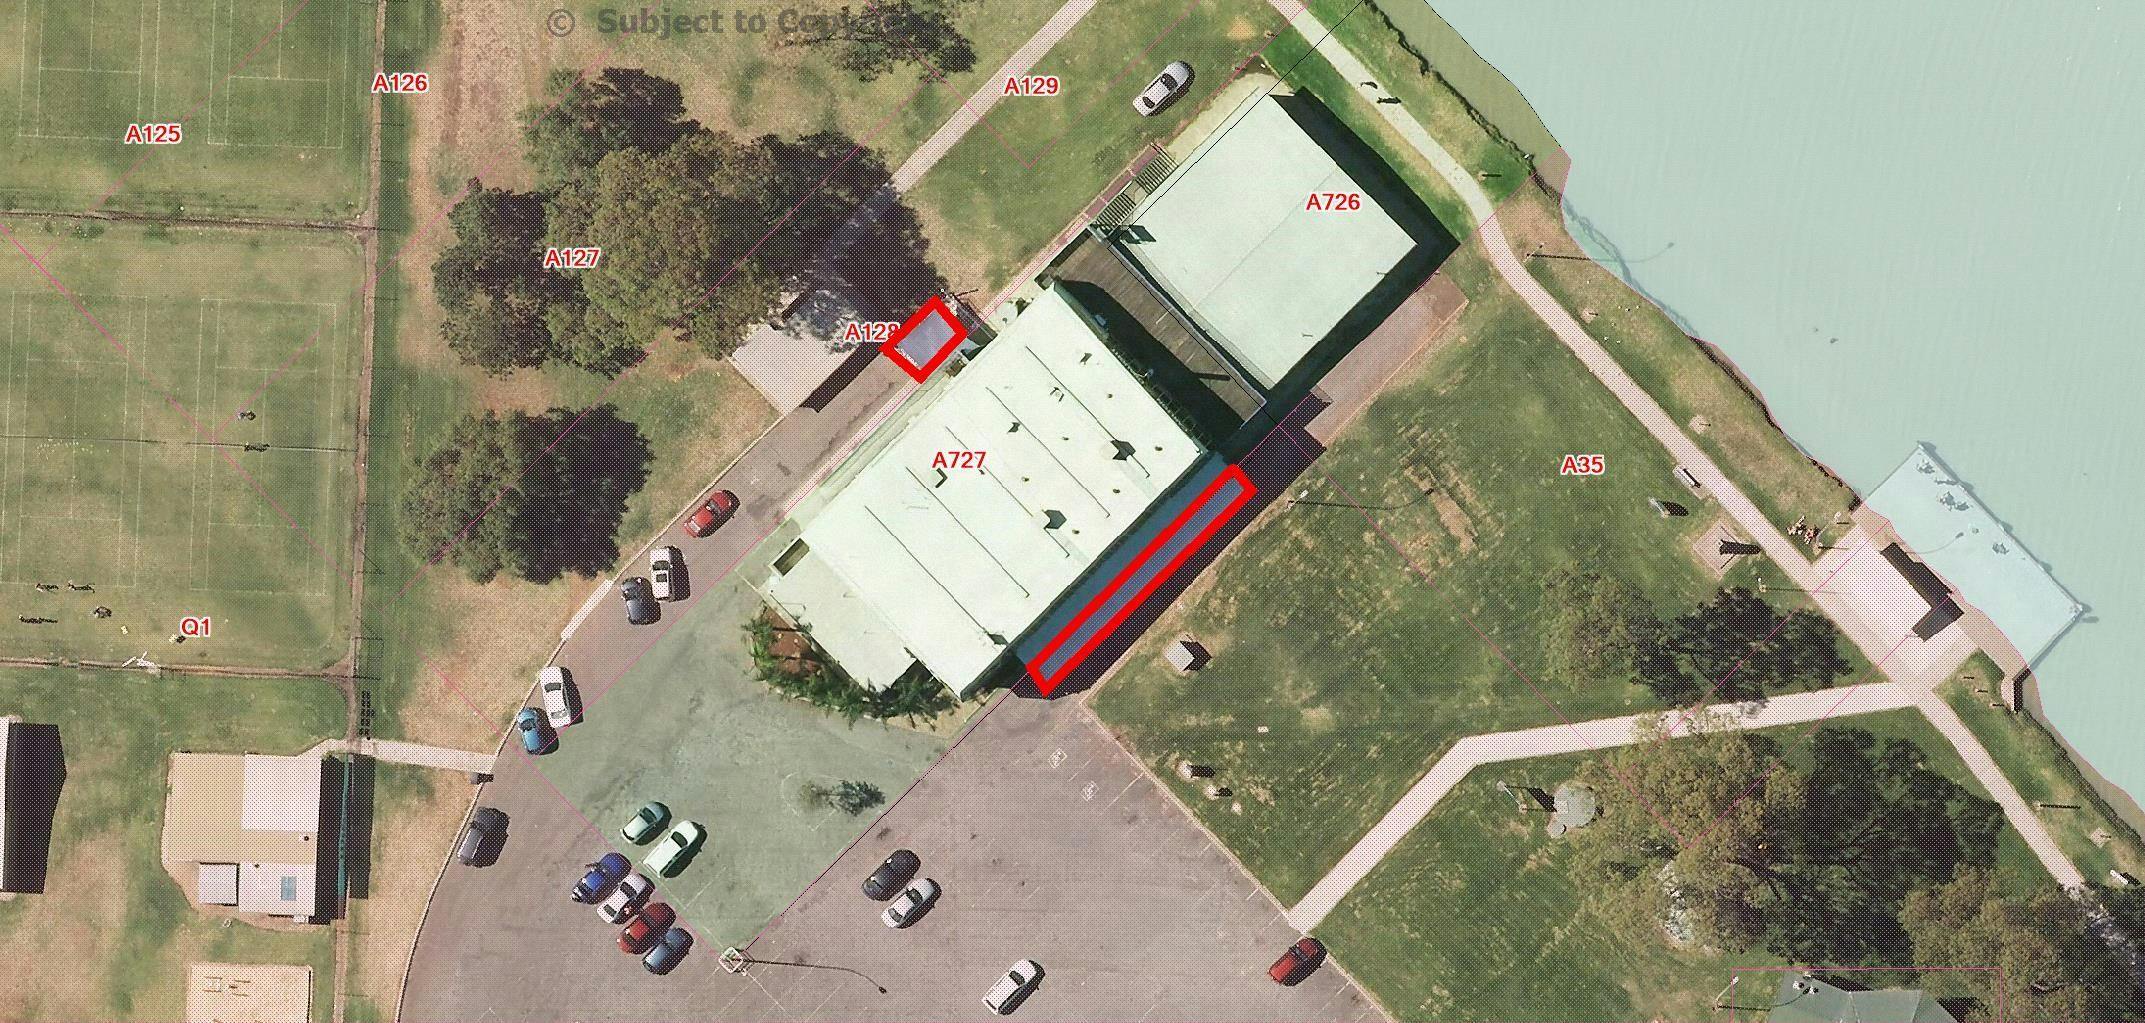 Murray Bridge And District Community Club Lease Map Of Proposed Lease Area